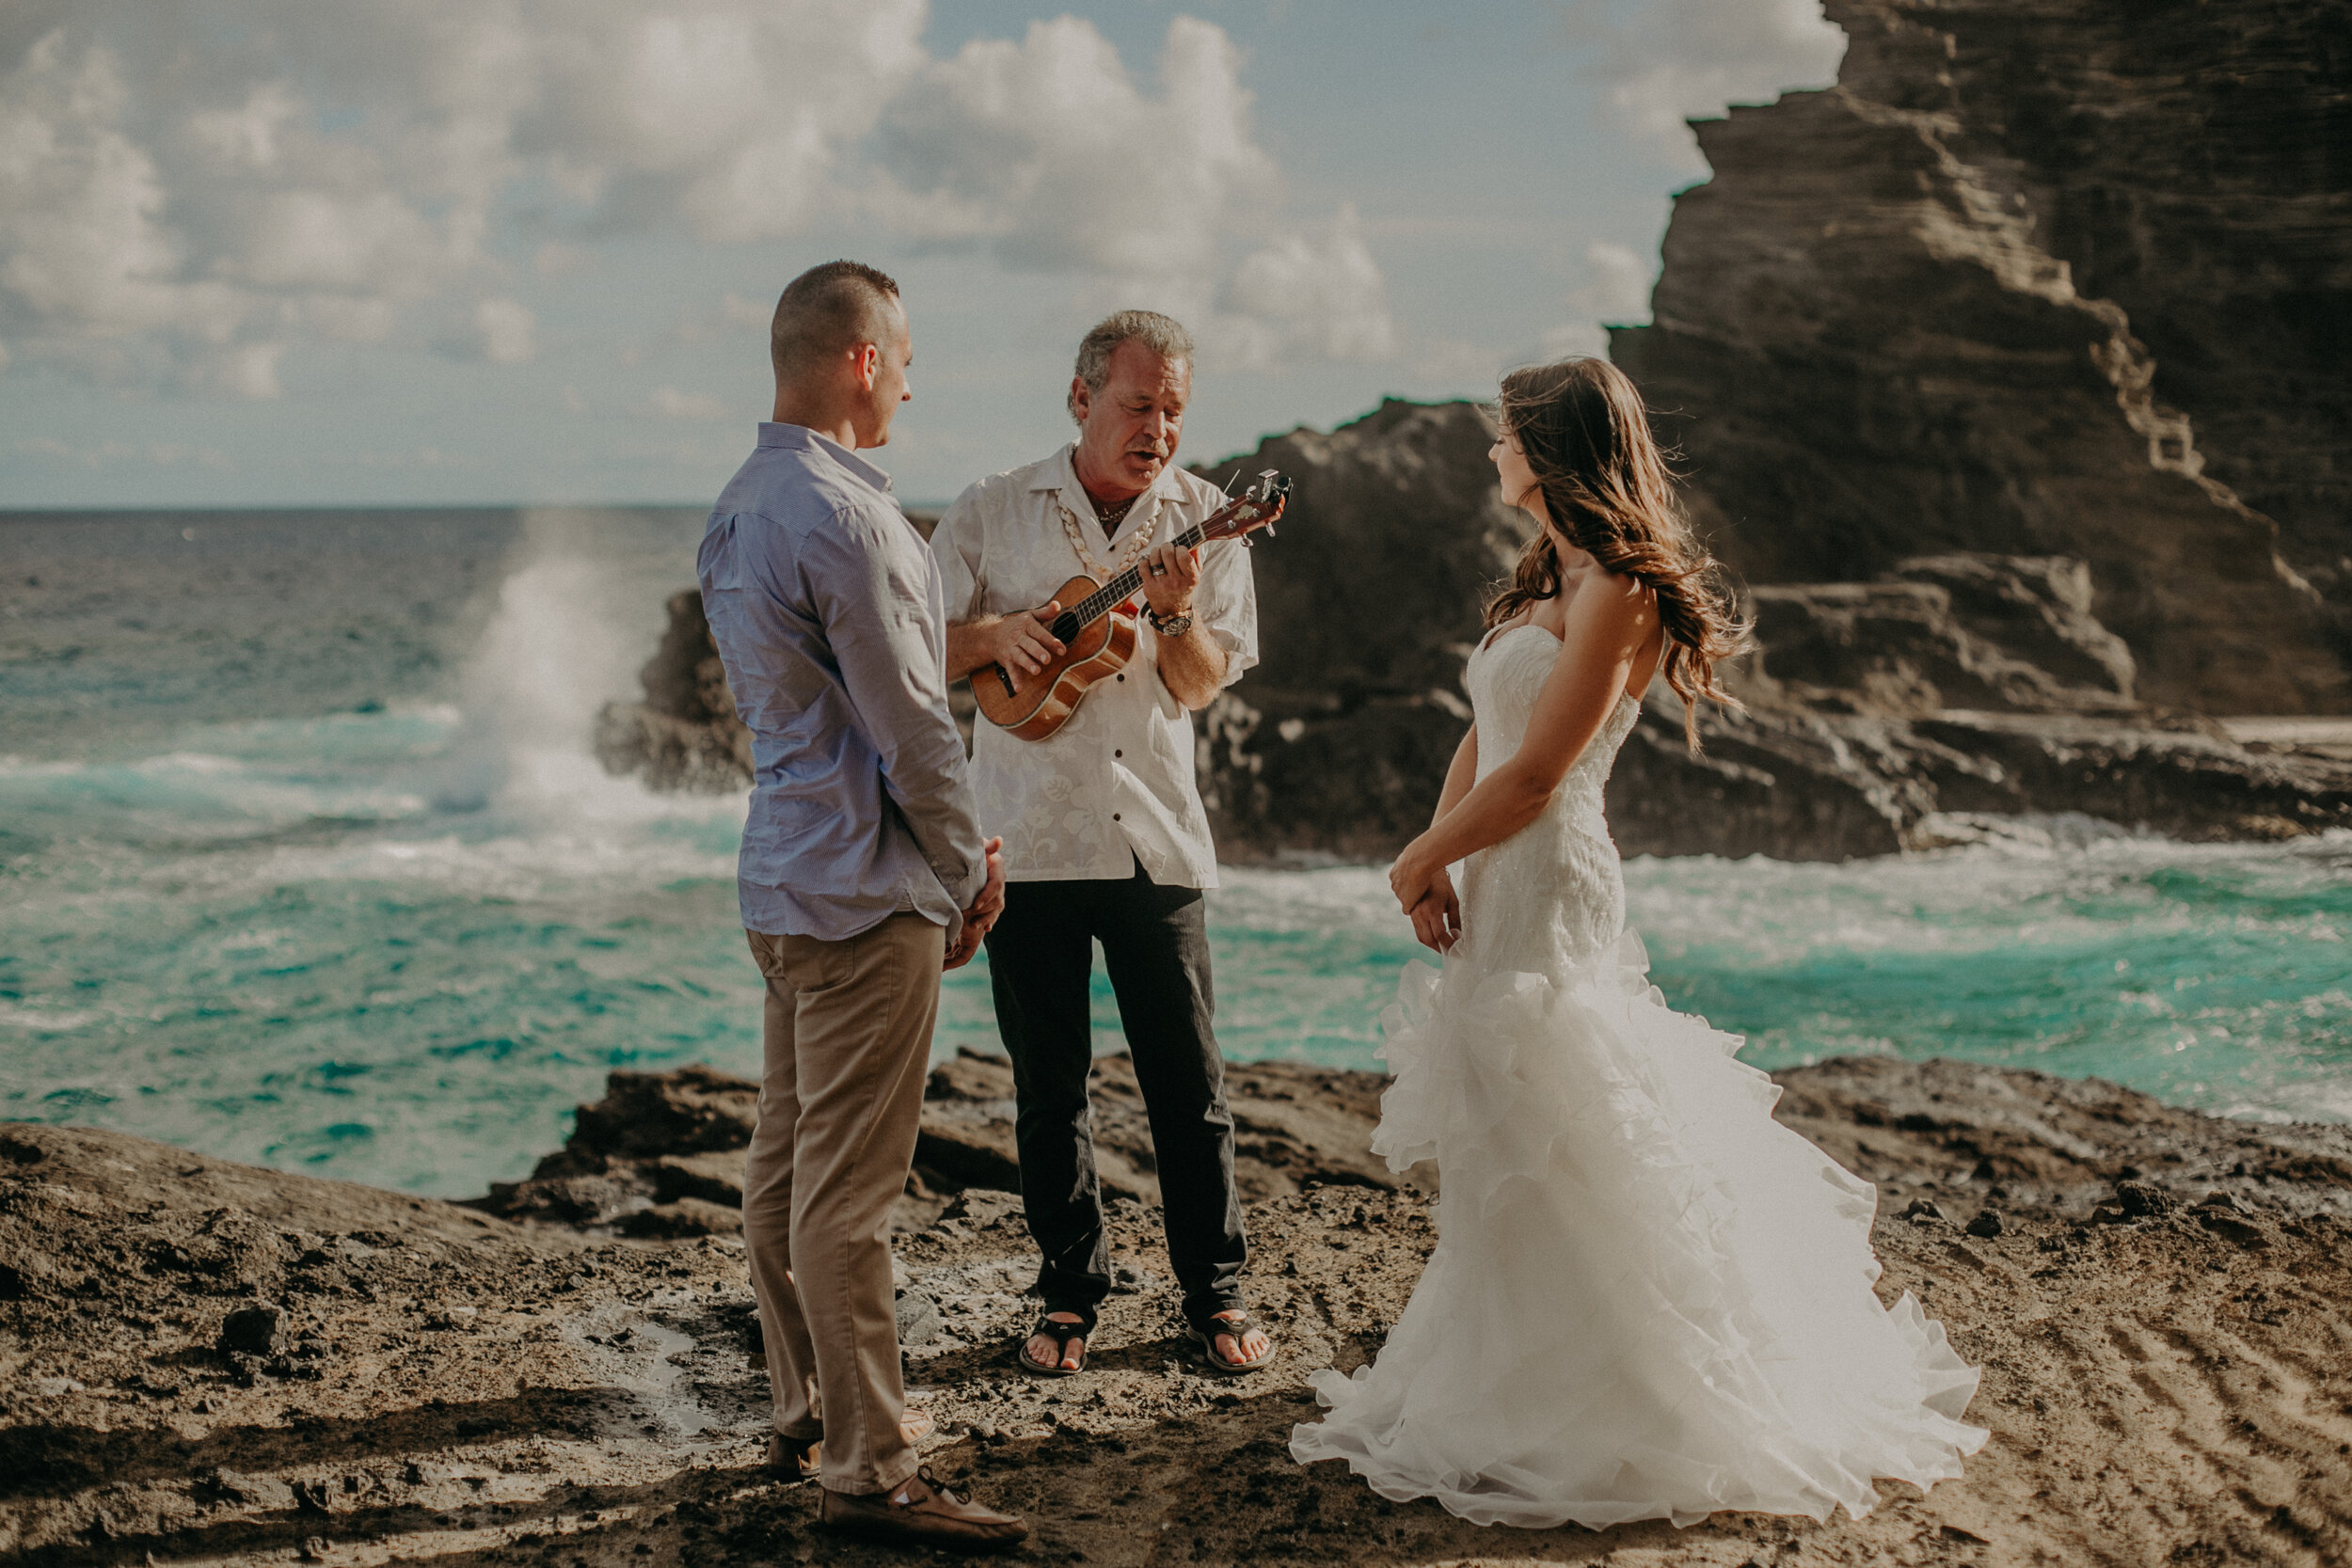  Oahu Elopement at Halona Blowhole in Hawaii #hawaiielopement #hawaiielopementphotographer #hawaiidestinationwedding #halonablowhole #halonablowholeelopement #oahuweddingphotographer #oahuelopementphotographer #oahuelopement #oahudestinationphotograp